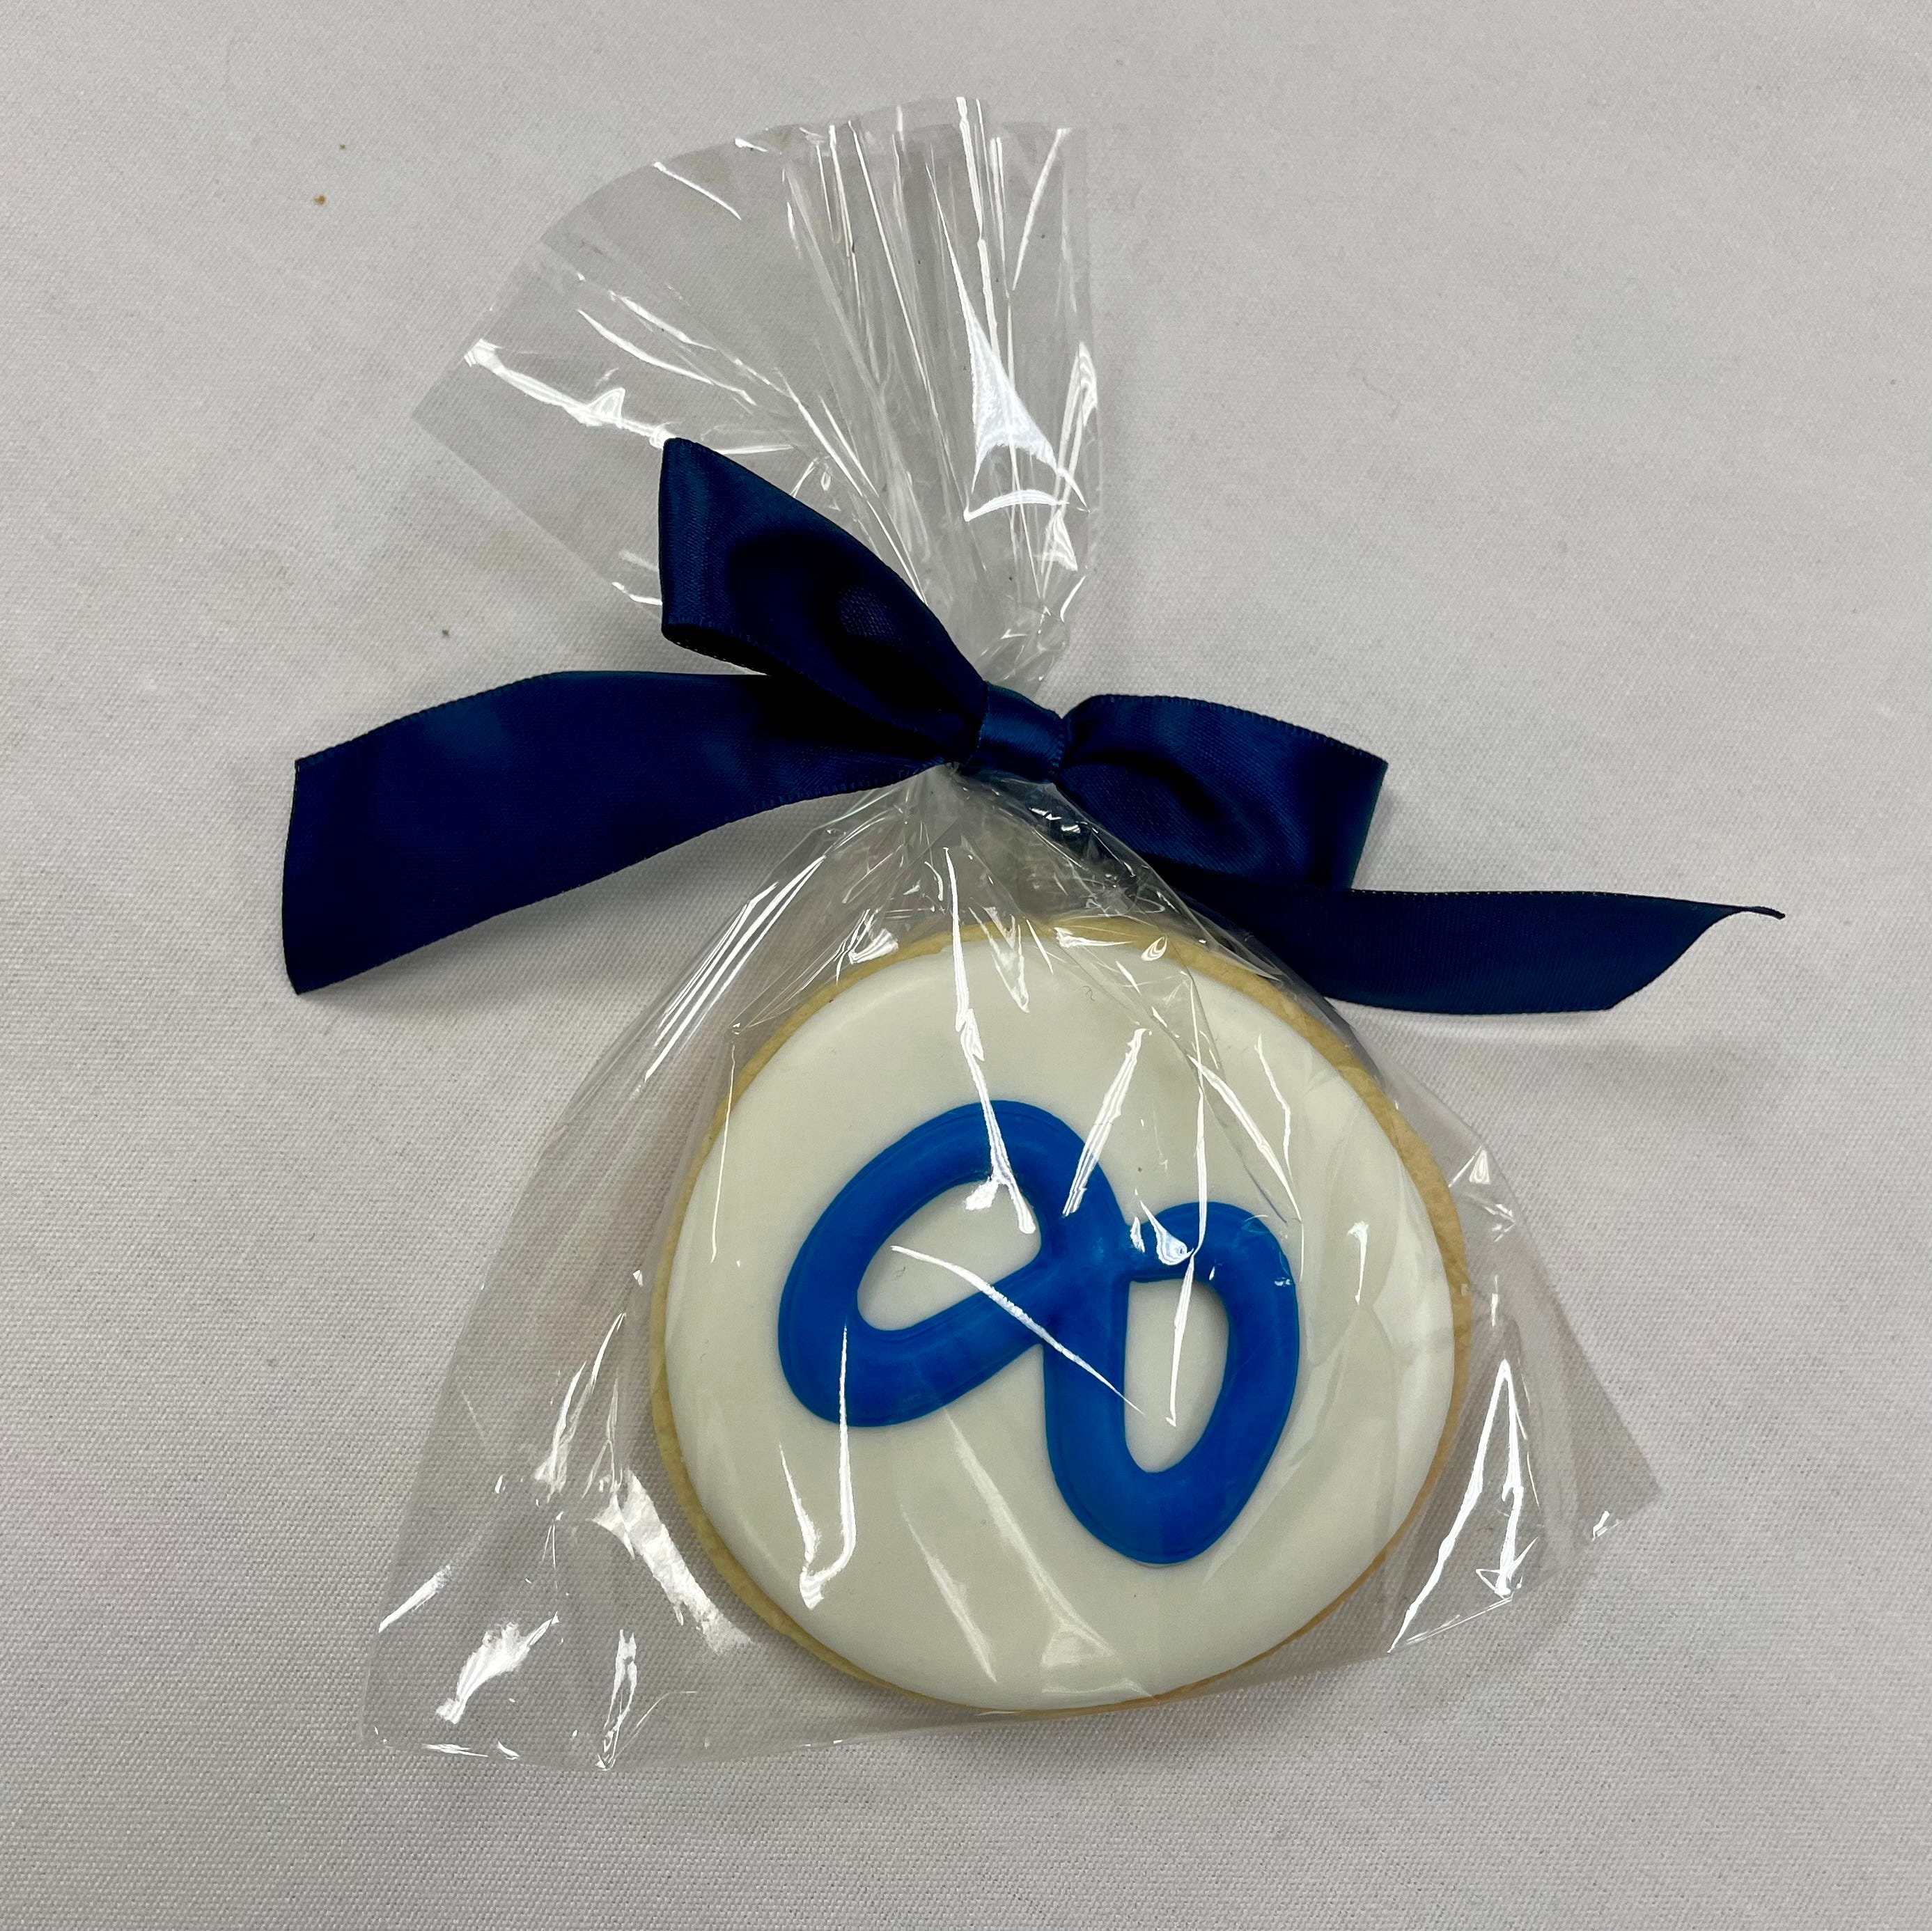 Sugar cookie with the Meta logo on it